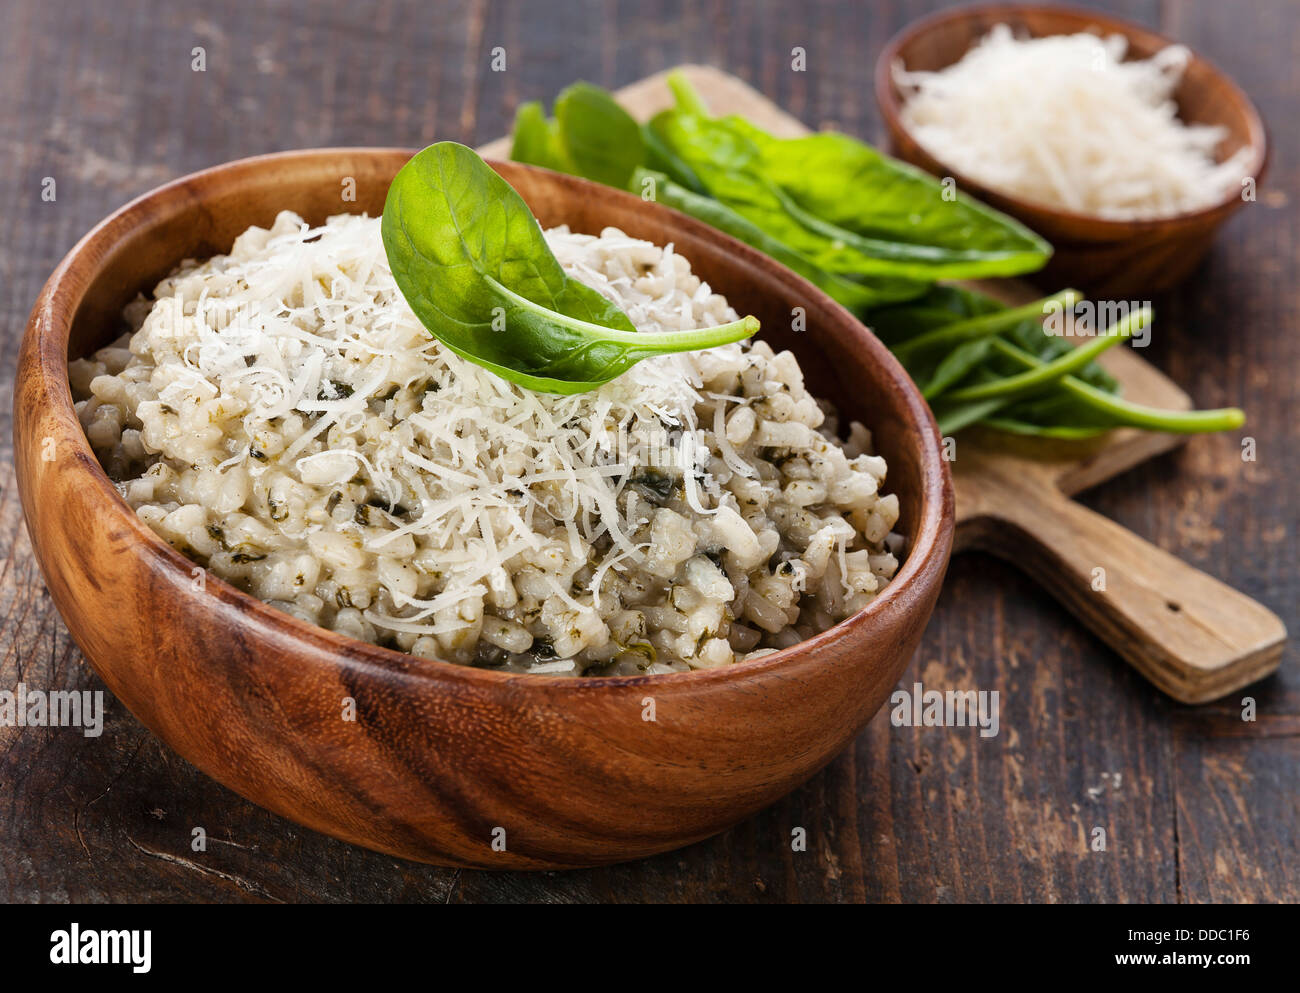 Risotto mit Spinat in Holzschale Stockfoto